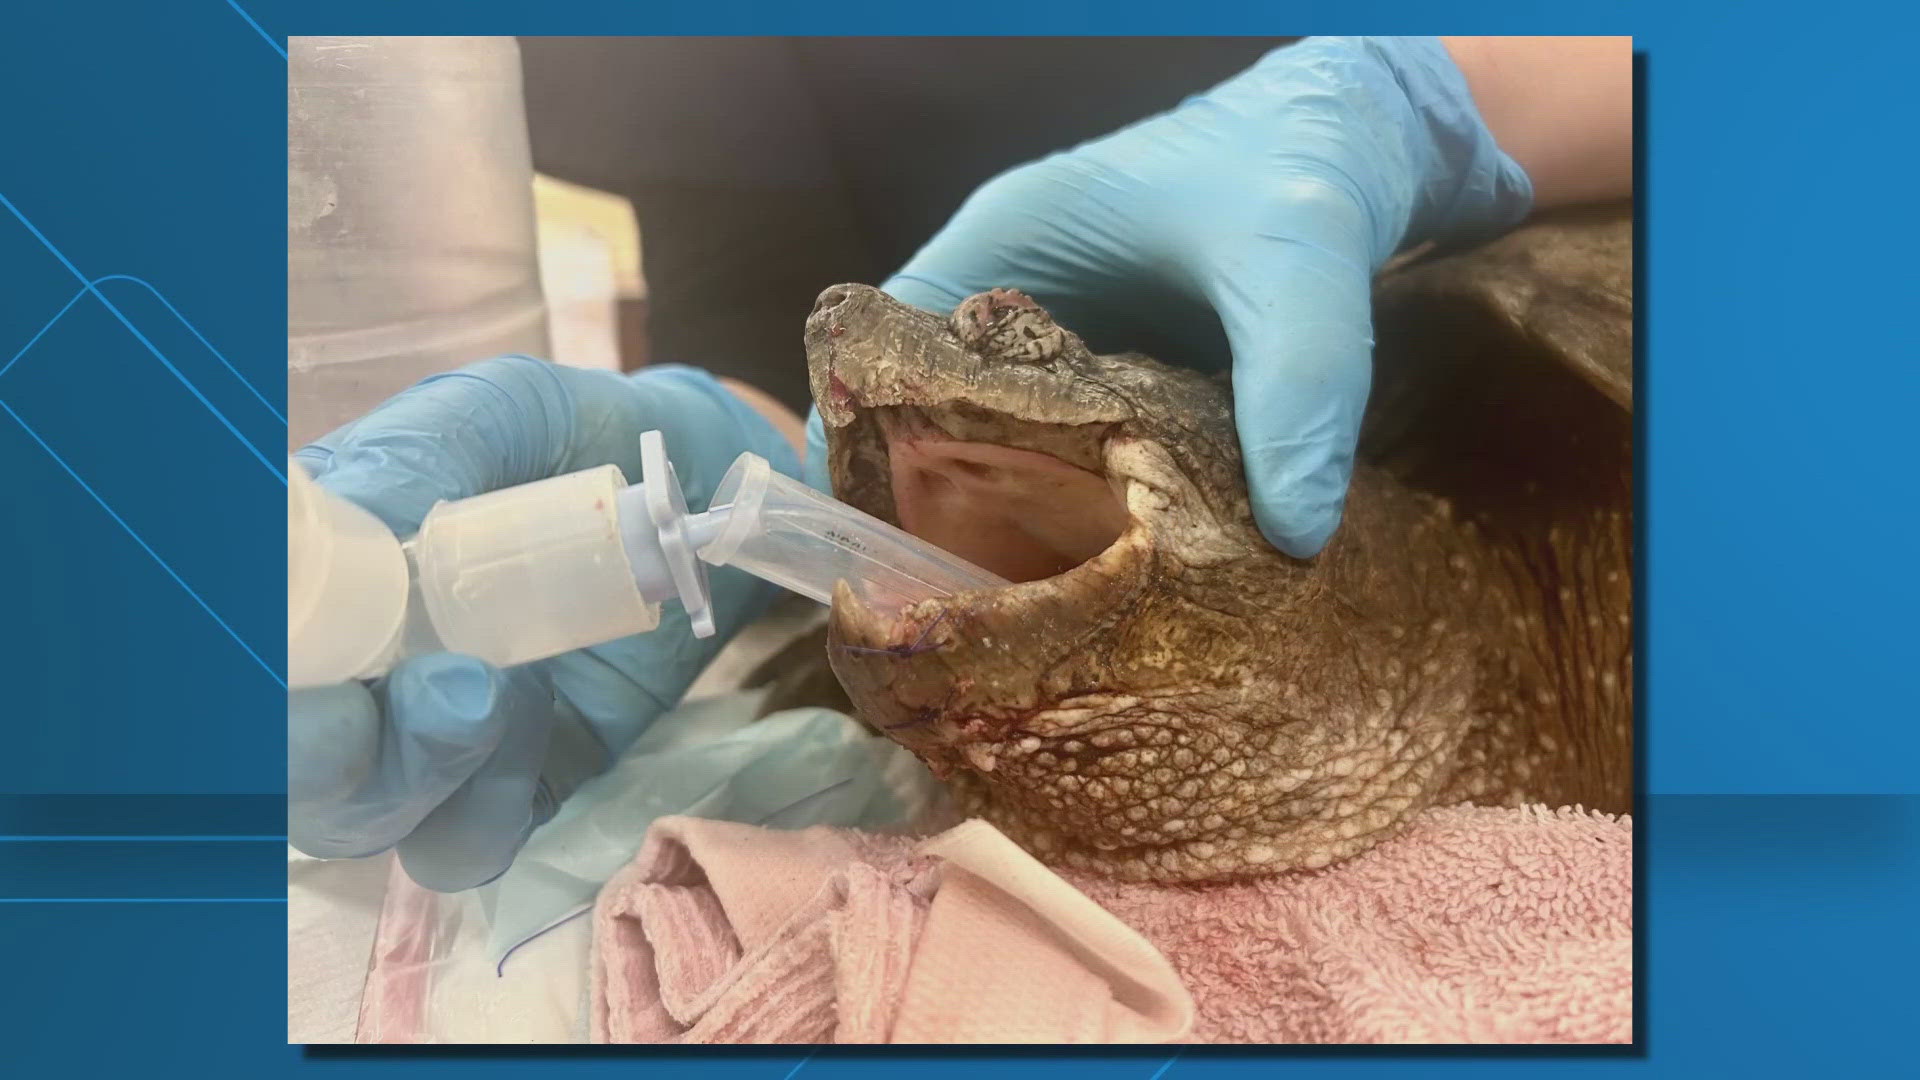 The center said that the snapping turtle suffered a jaw fracture and head trauma.